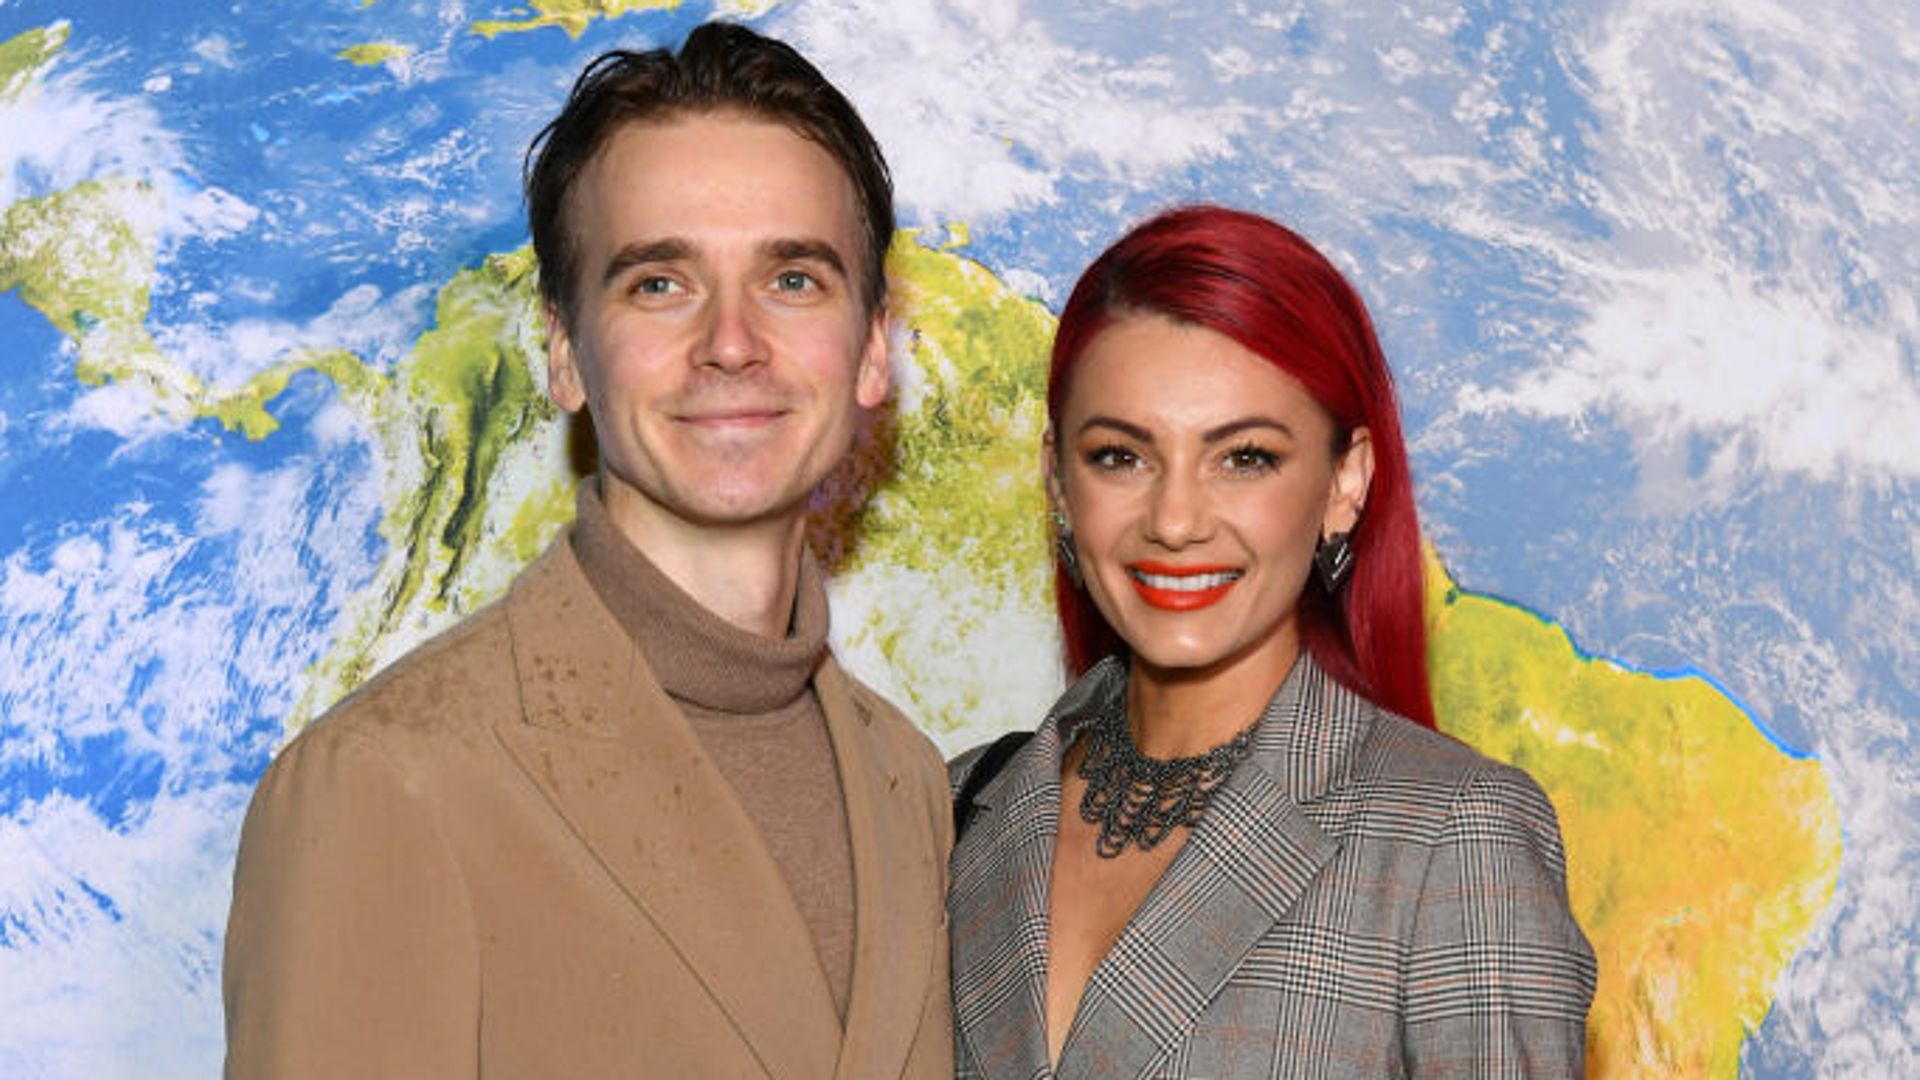 oe Sugg and Dianne Buswell attend the "BBC Earth Experience" launch at the Daikin Centre on March 29, 2023. He is wearing a camel coat and she is dressed in a grey check blazer. 